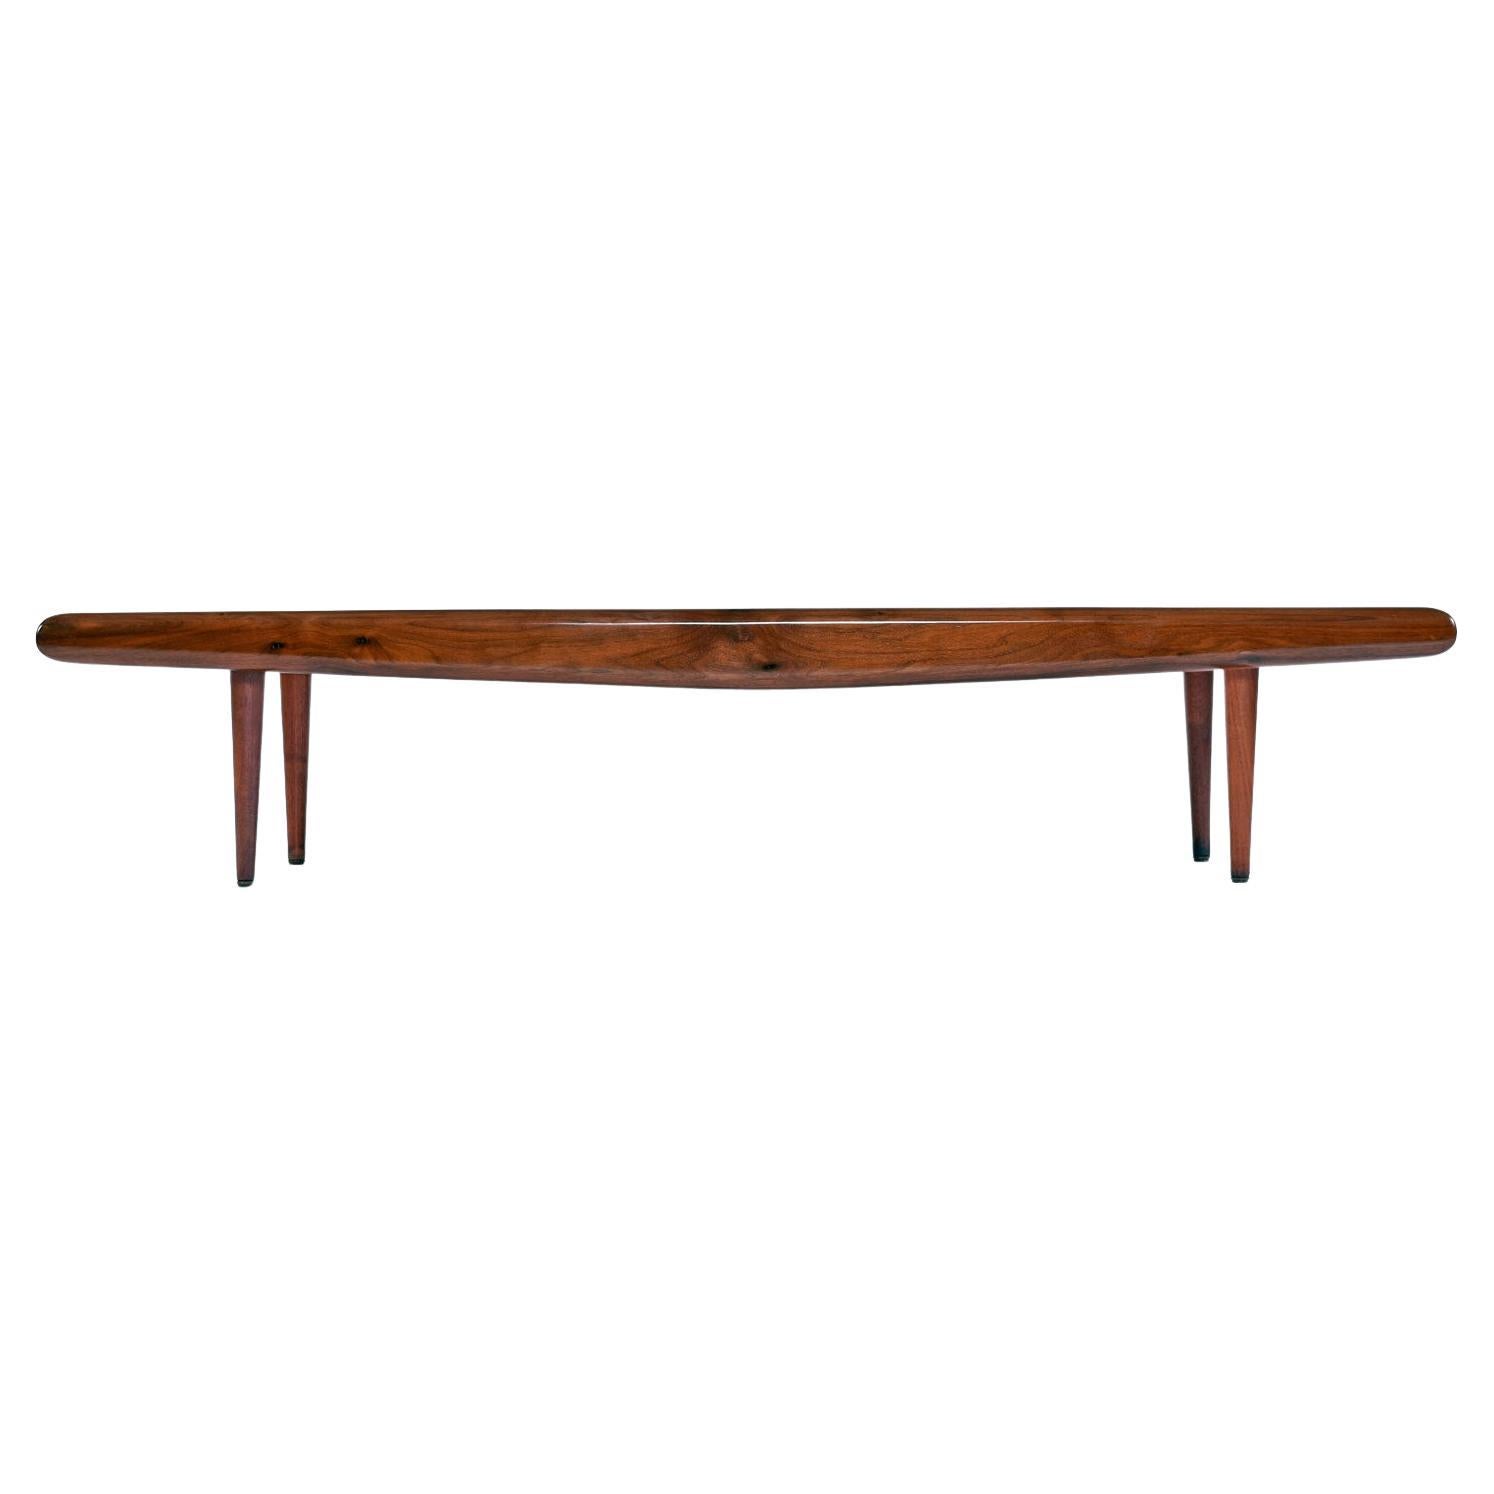 The fiery cathedral grain top of this captivating coffee table is recessed and framed out by solid walnut beams with burl accents. The front and back cross beams of walnut have a slight taper towards the ends to emphasize the look of winged flight.